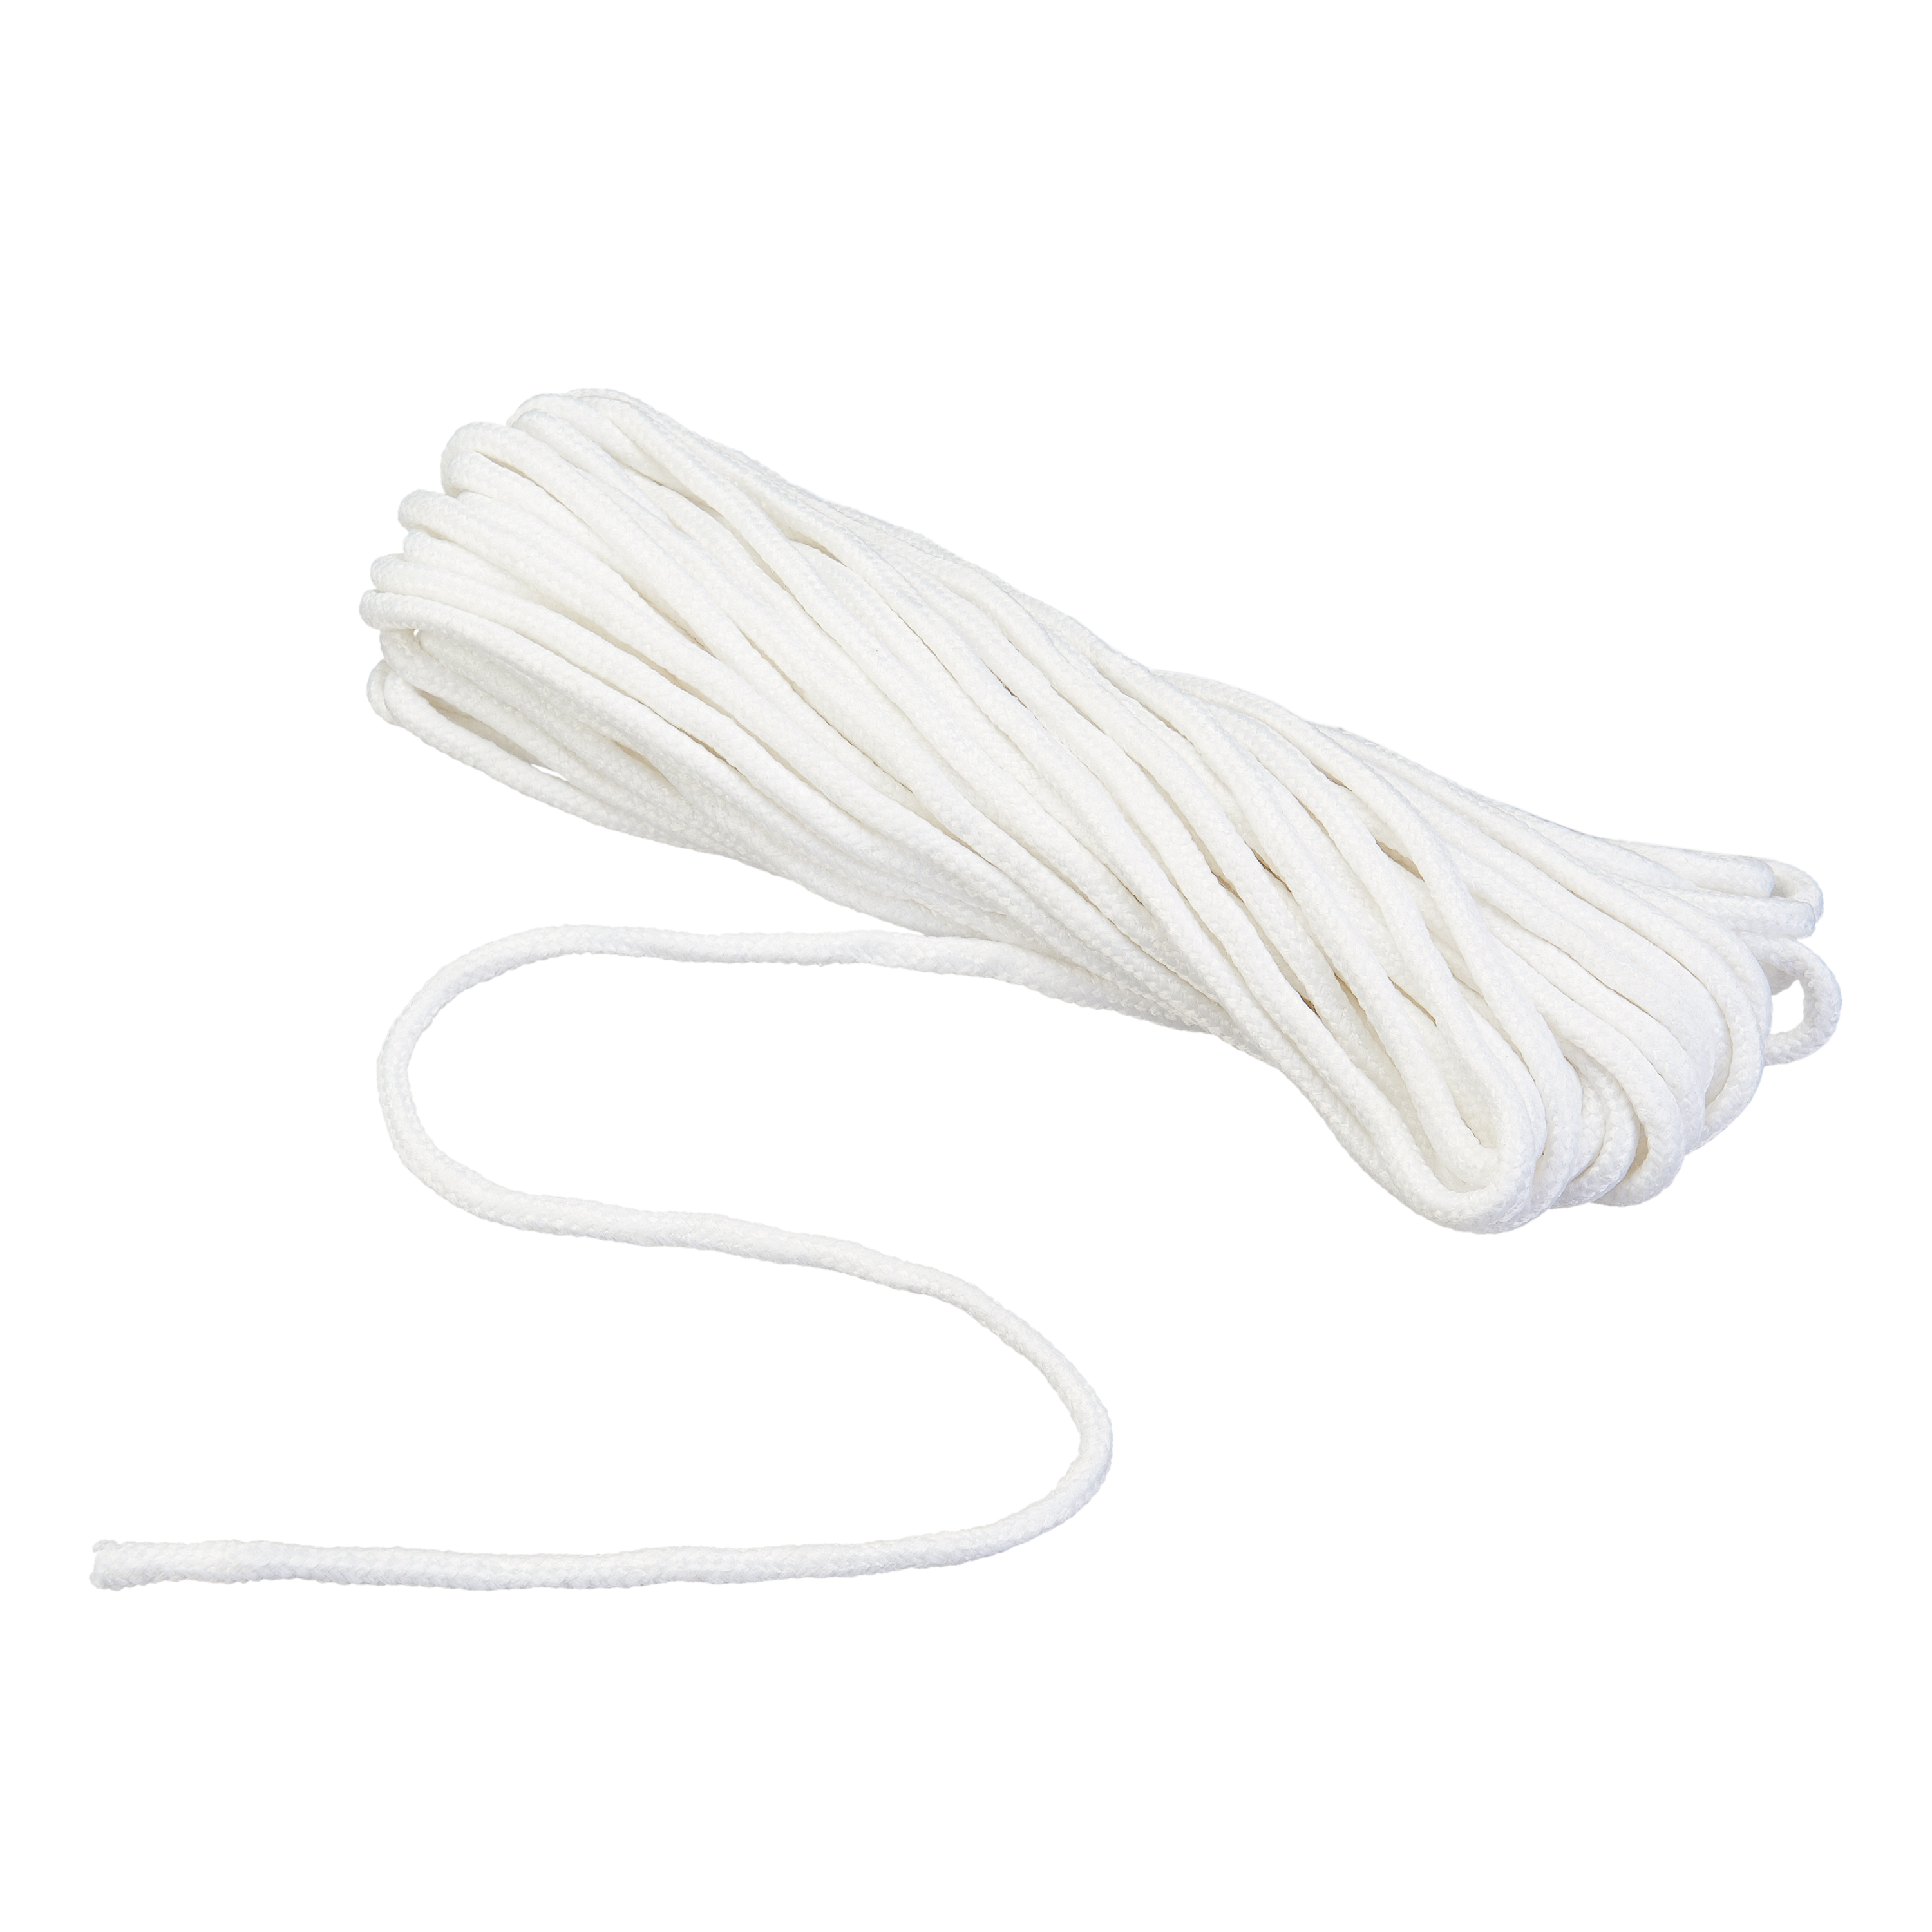 Mainstays Braided Polyester Clothesline, 50 feet, White - image 1 of 6